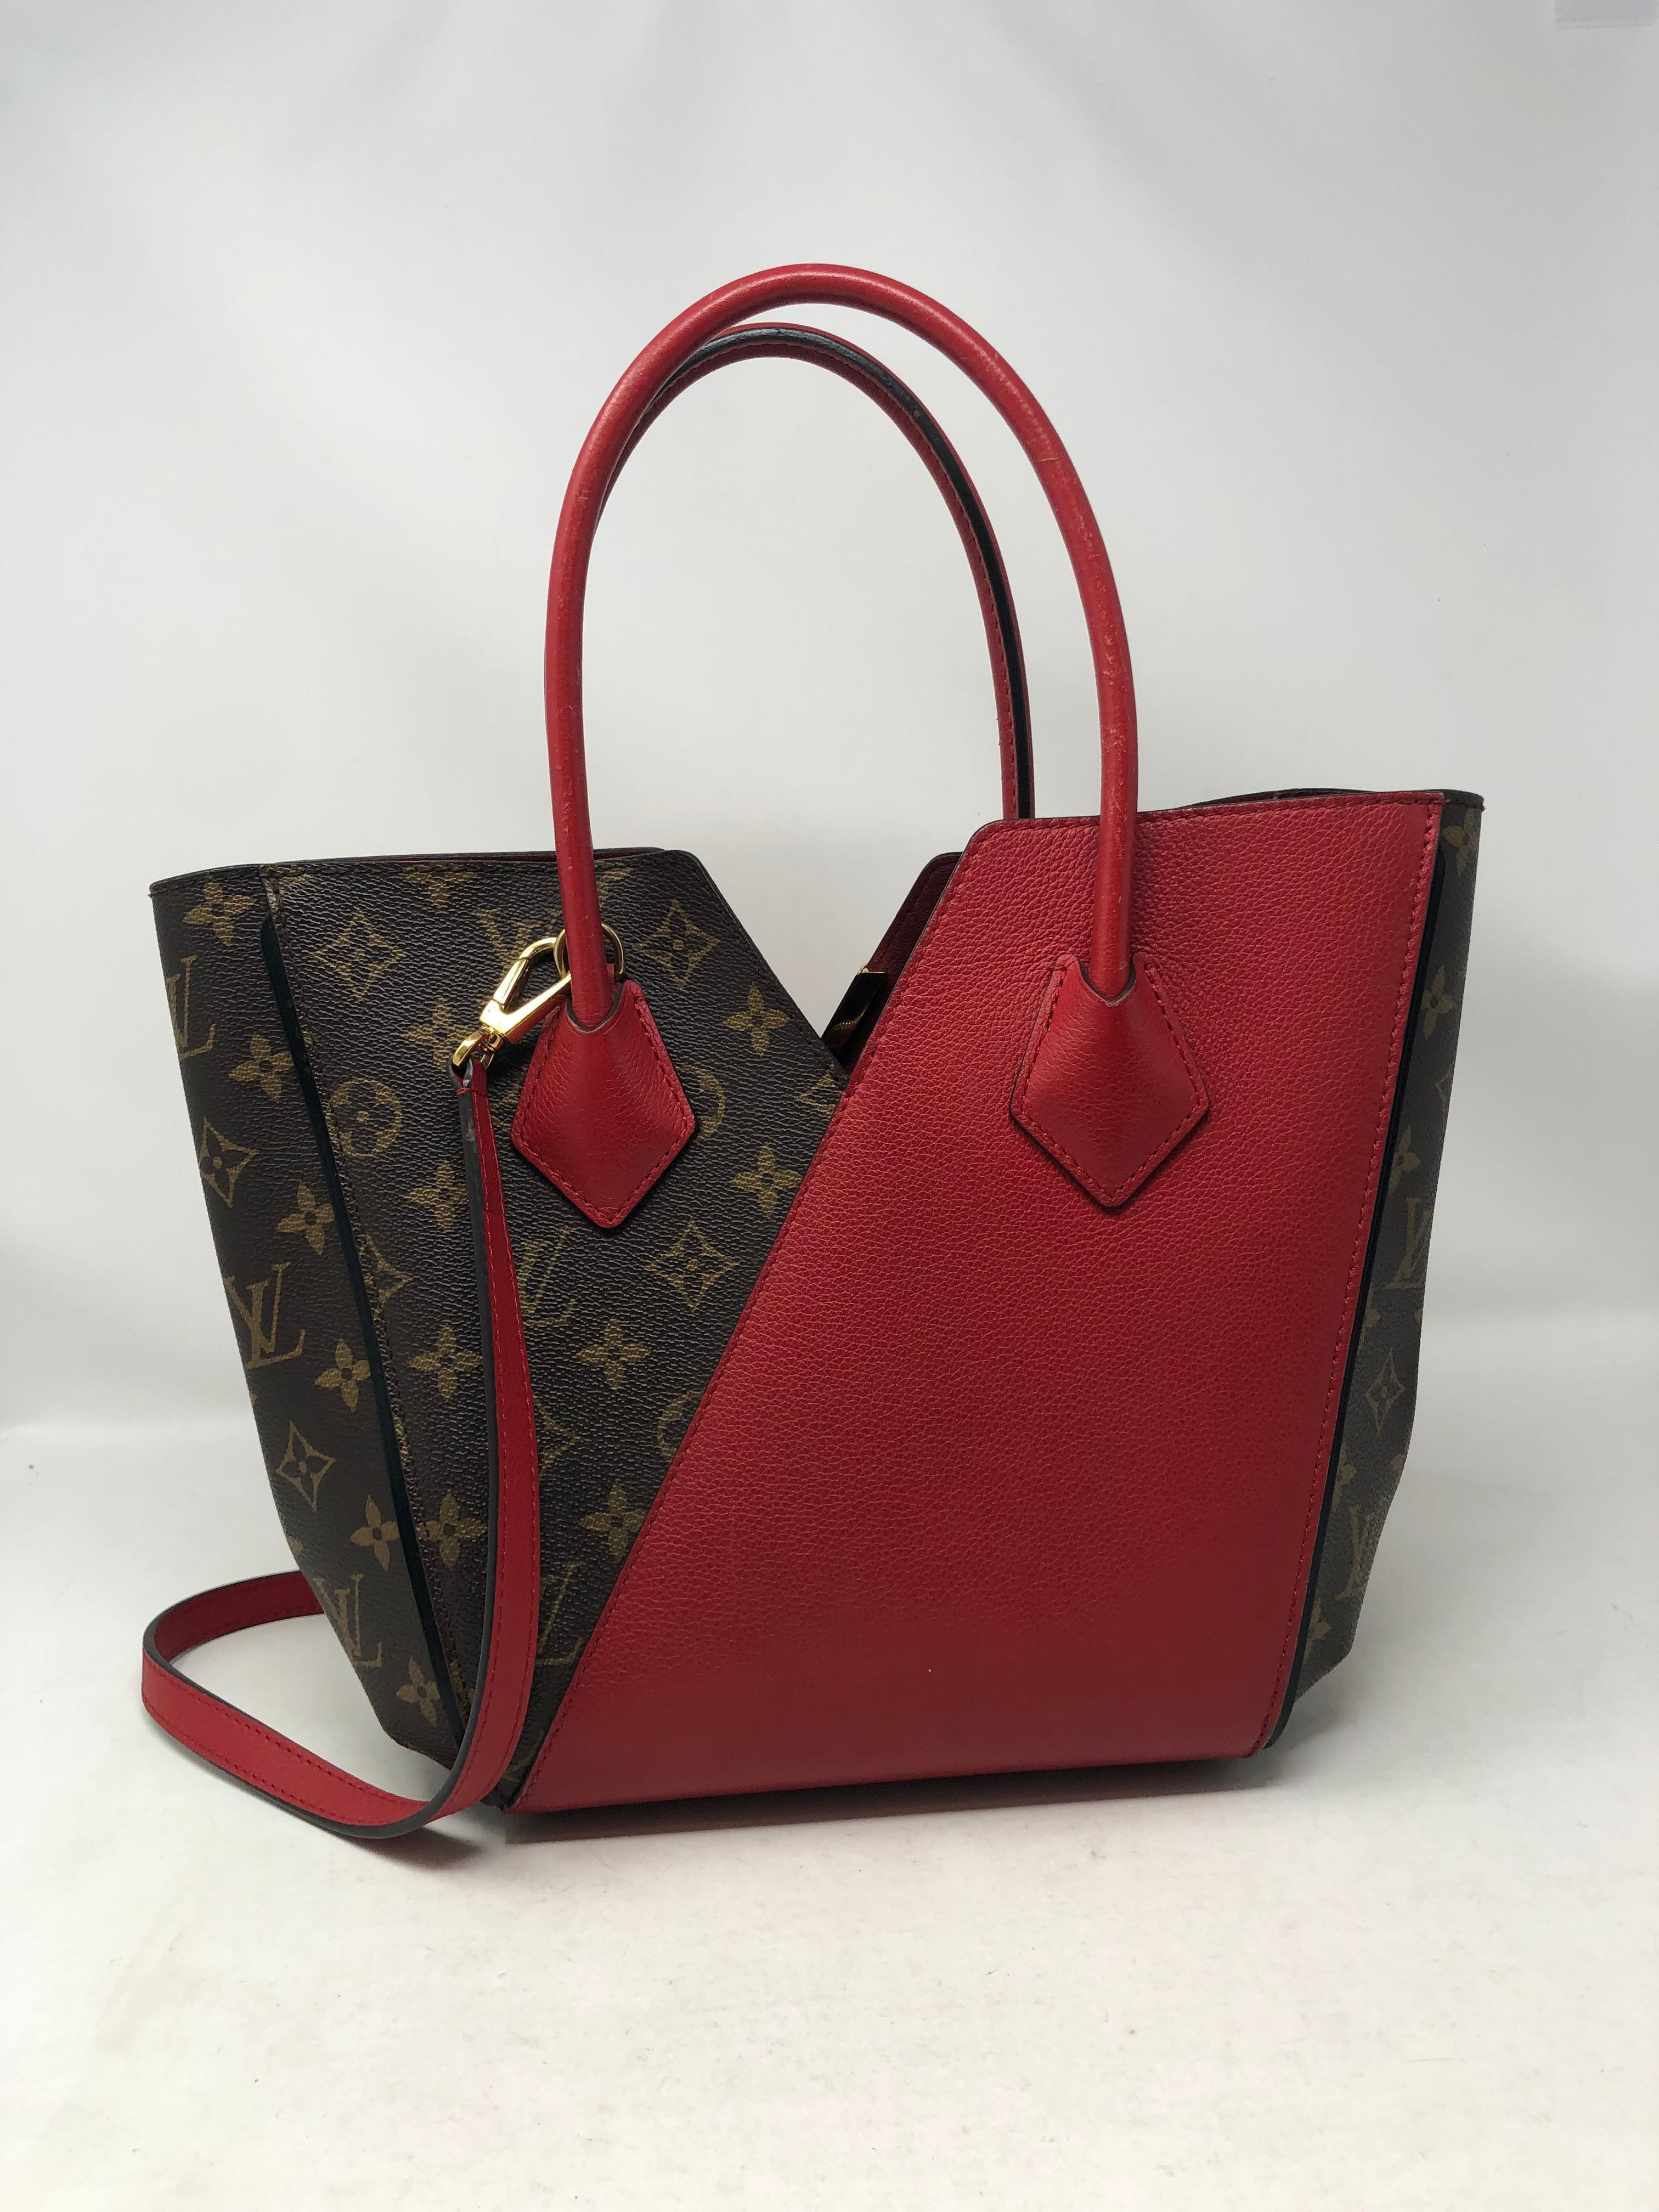 Louis Vuitton Kimono Bag with extra strap. Can be worn cross the body. Beautiful combination of red leather and monogram. Limited and rare. A few marks inside. Exterior is in good condition. Guaranteed authentic. 